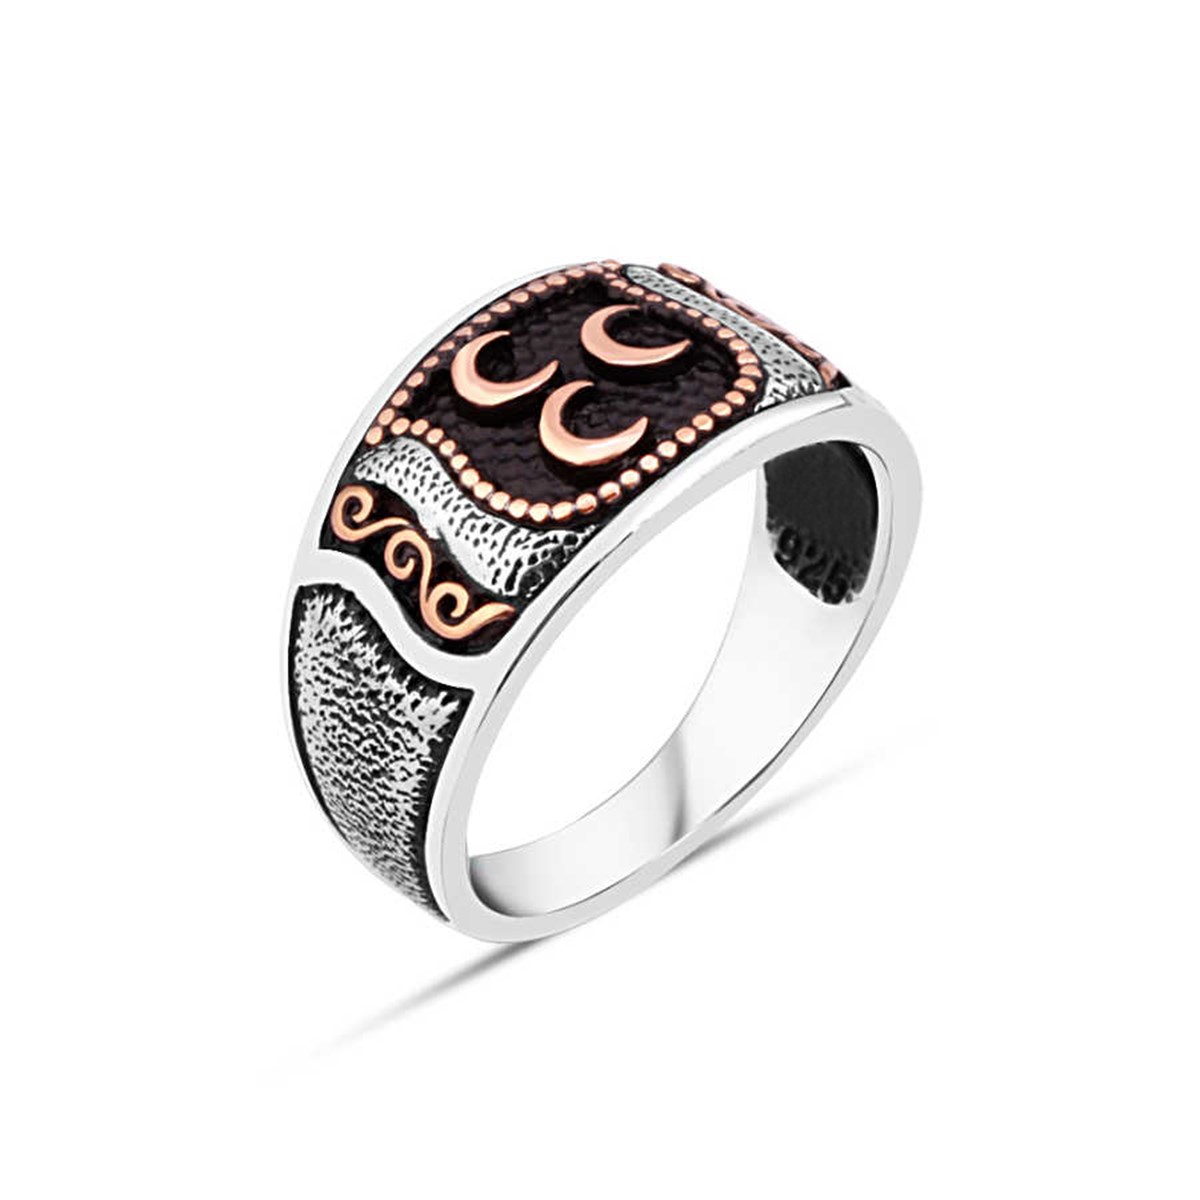 3 Crescent Silver Men's Ring